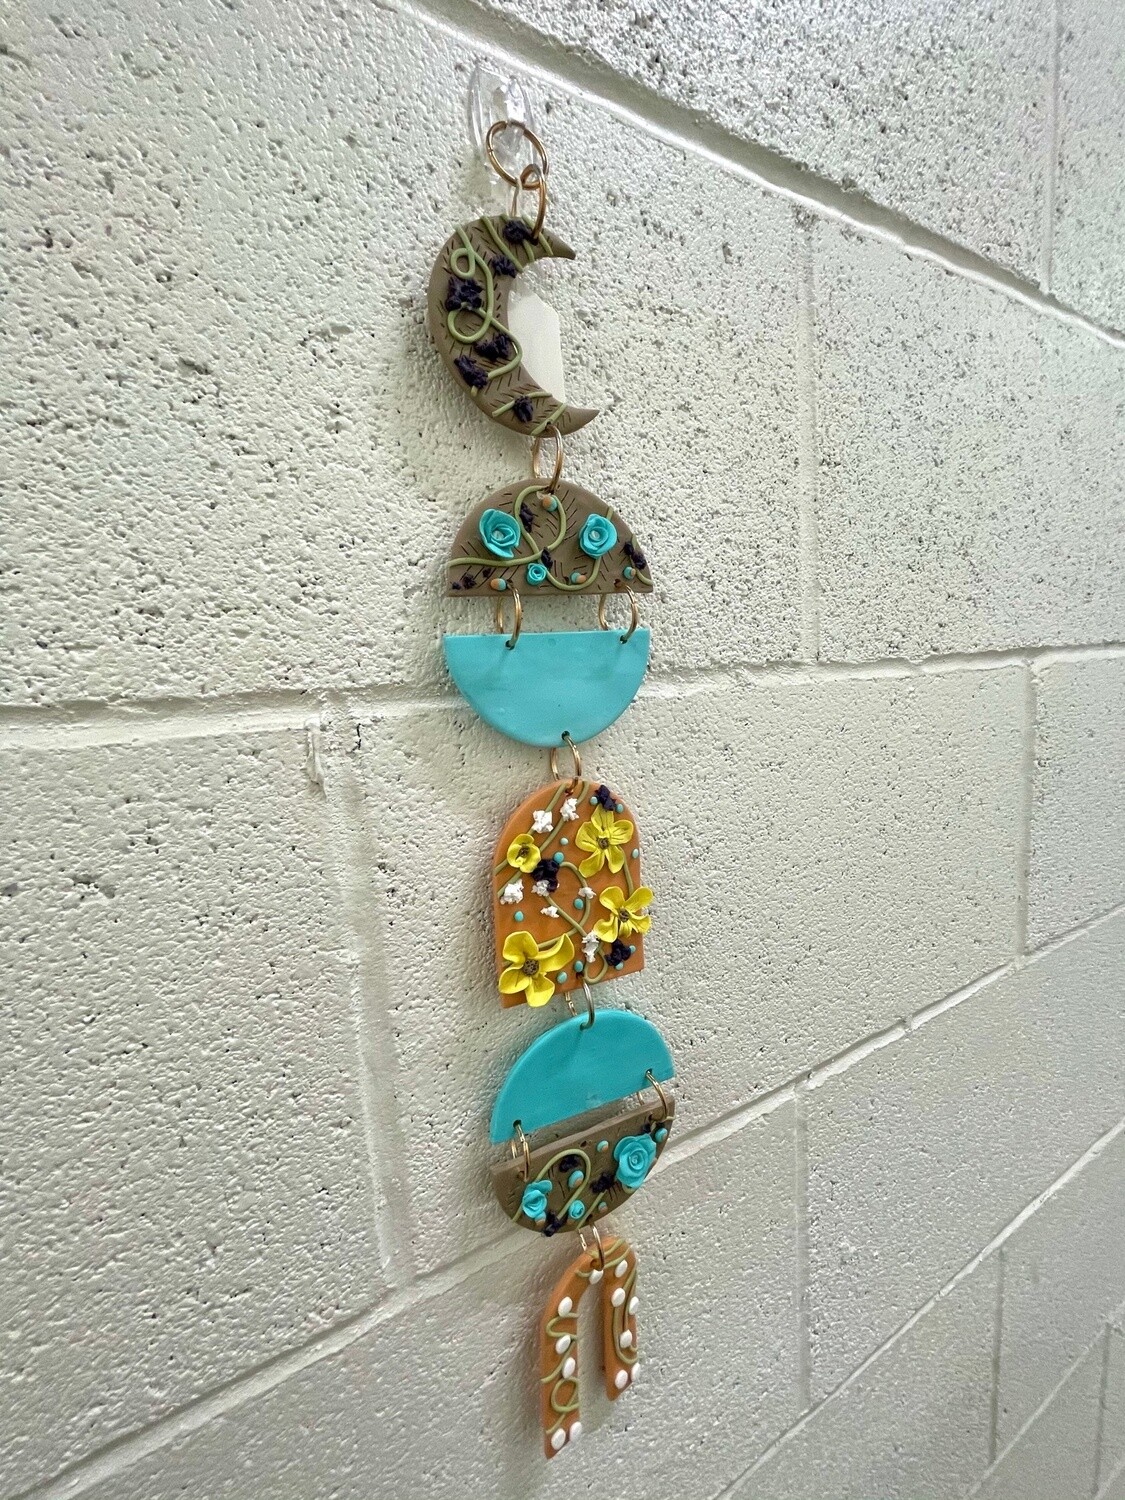 SALE - Peach and Teal Wall Hanging